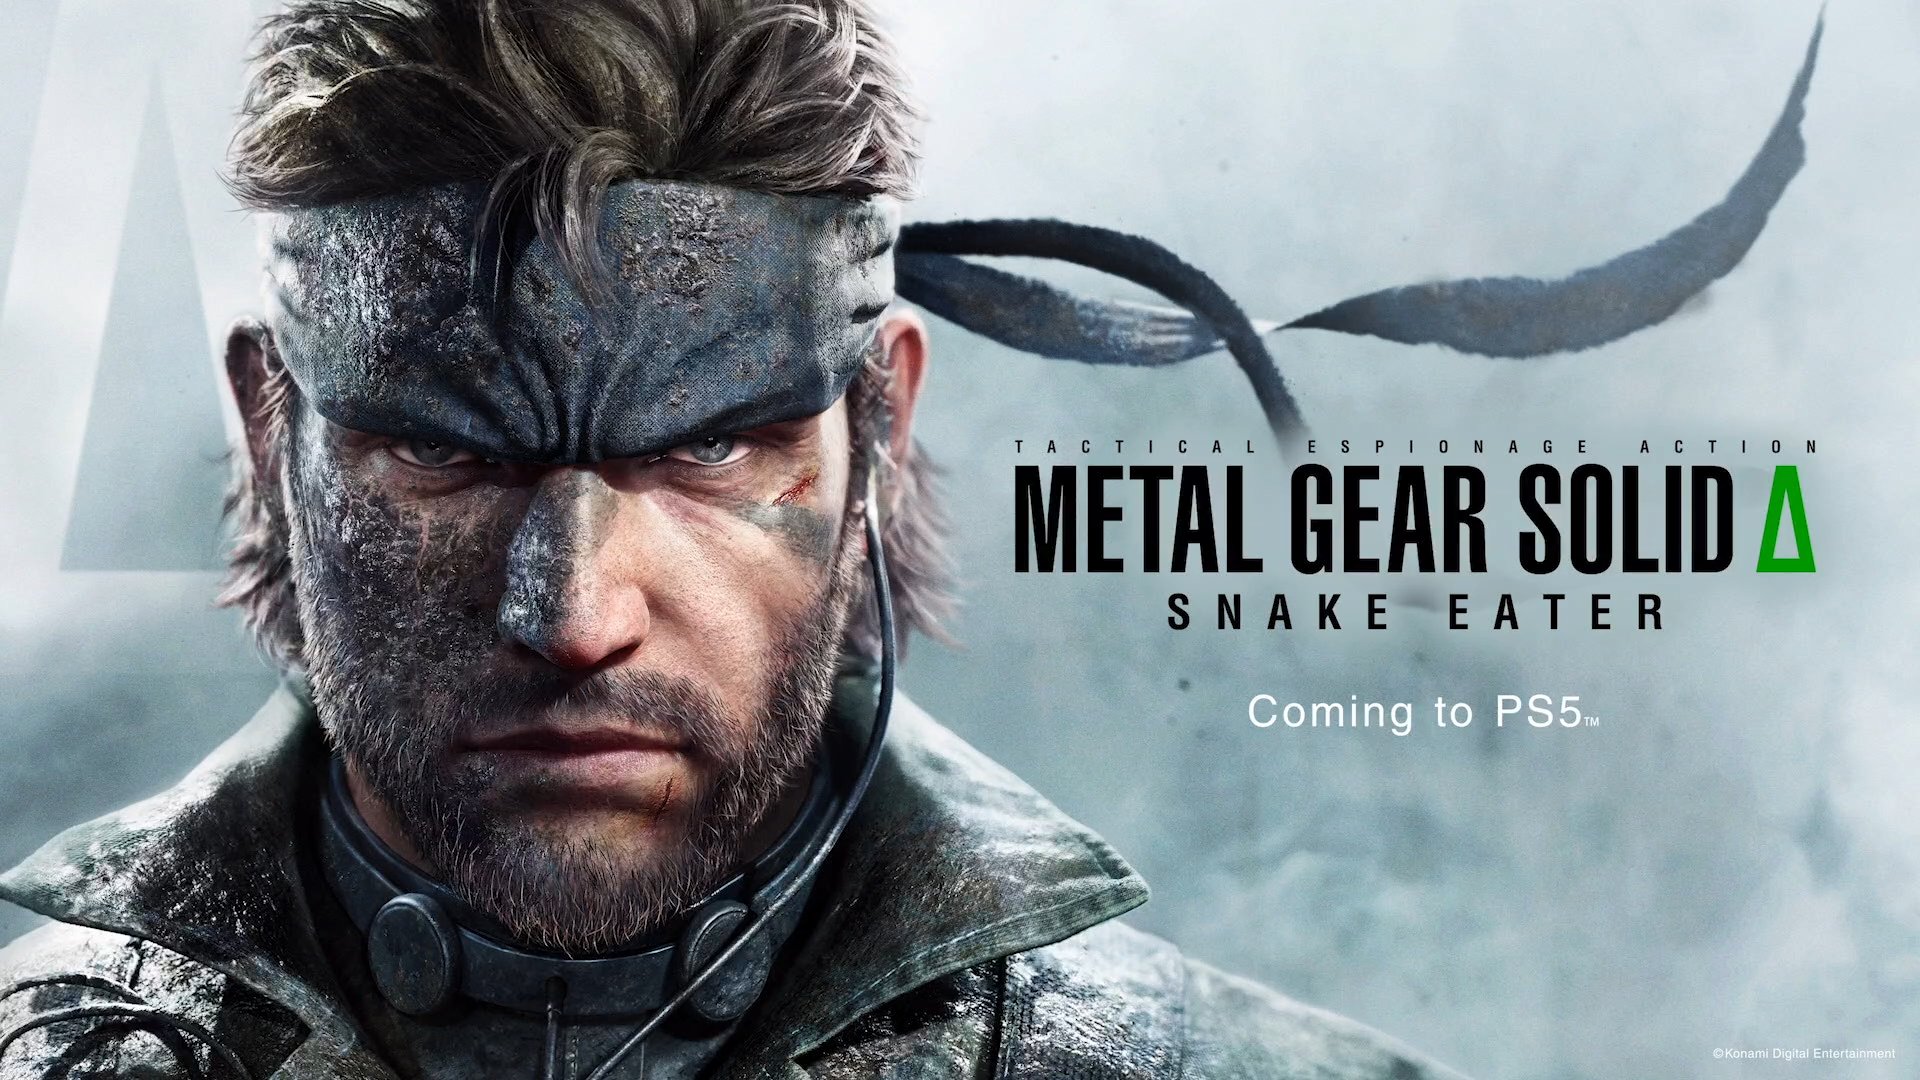 Metal Gear Solid: Master Collection Vol. 1 review